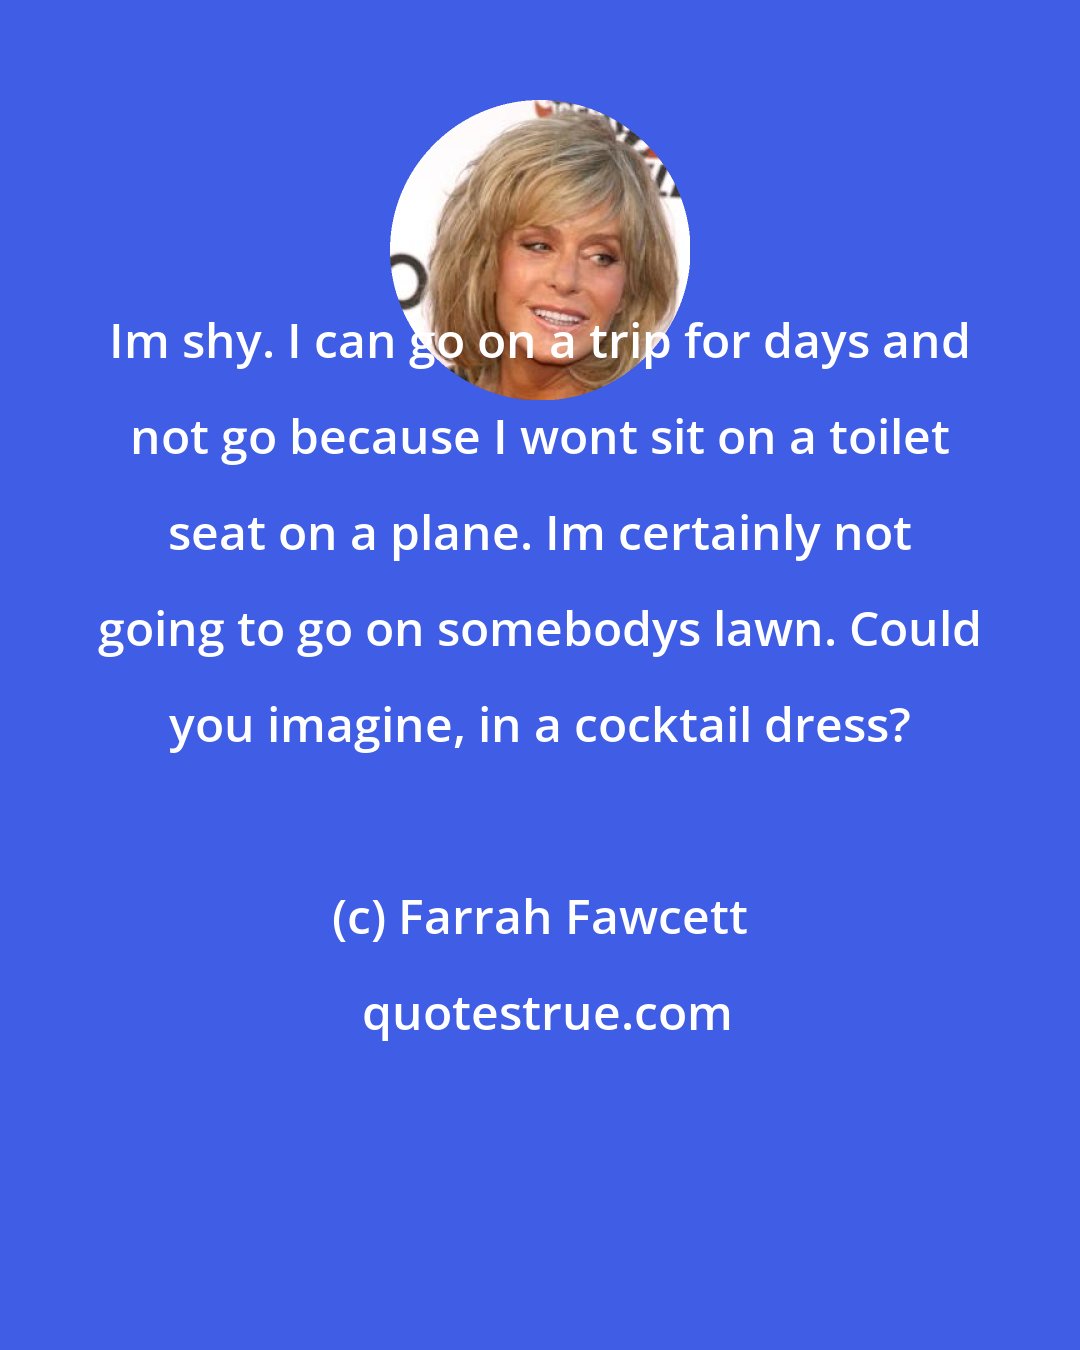 Farrah Fawcett: Im shy. I can go on a trip for days and not go because I wont sit on a toilet seat on a plane. Im certainly not going to go on somebodys lawn. Could you imagine, in a cocktail dress?